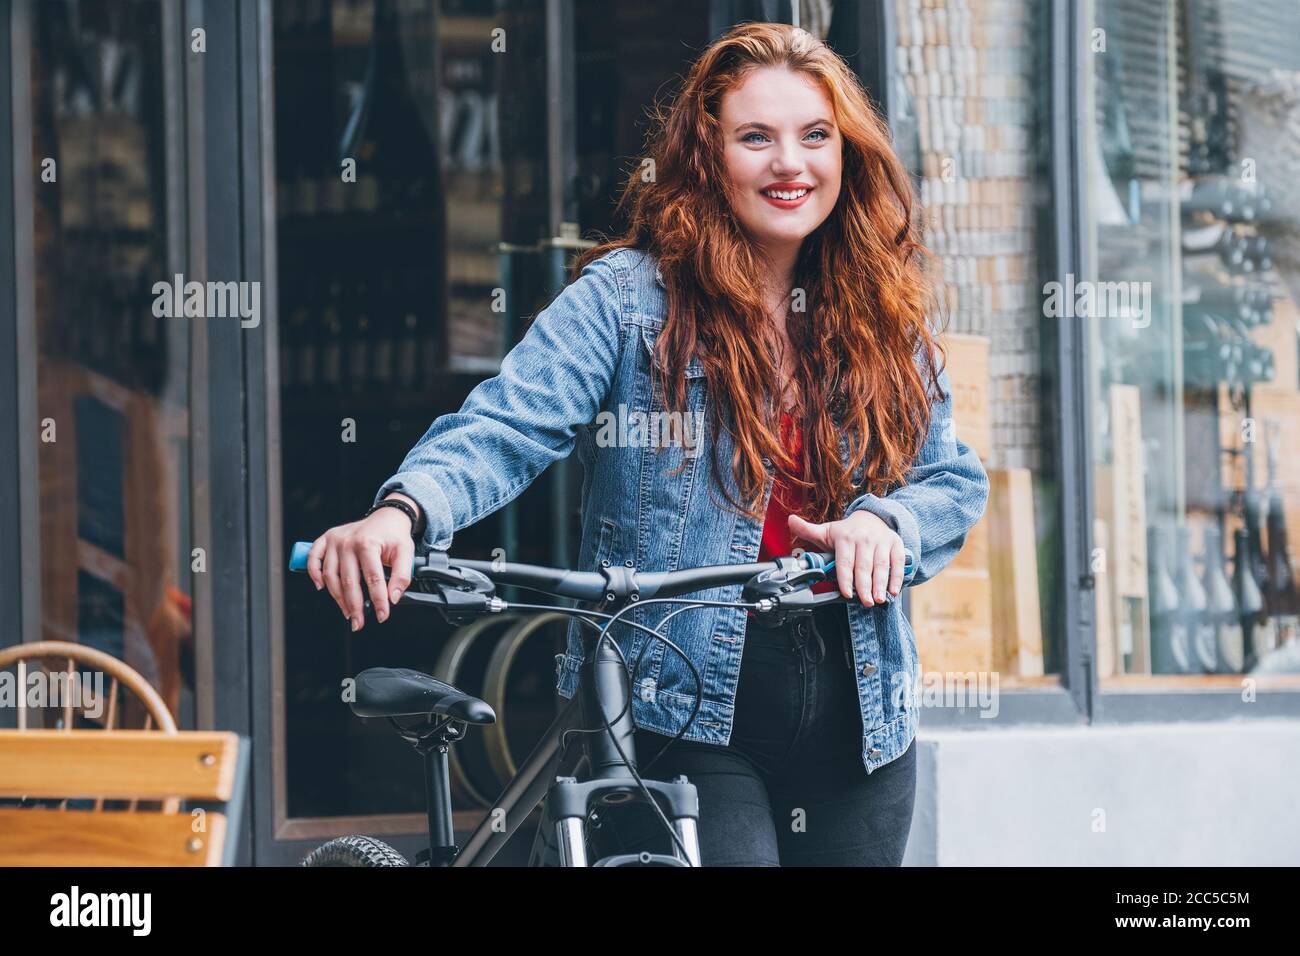 Portrait of smiling red curled long hair caucasian woman on the city street walking with a bicycle. Natural people beauty concept image. Stock Photo